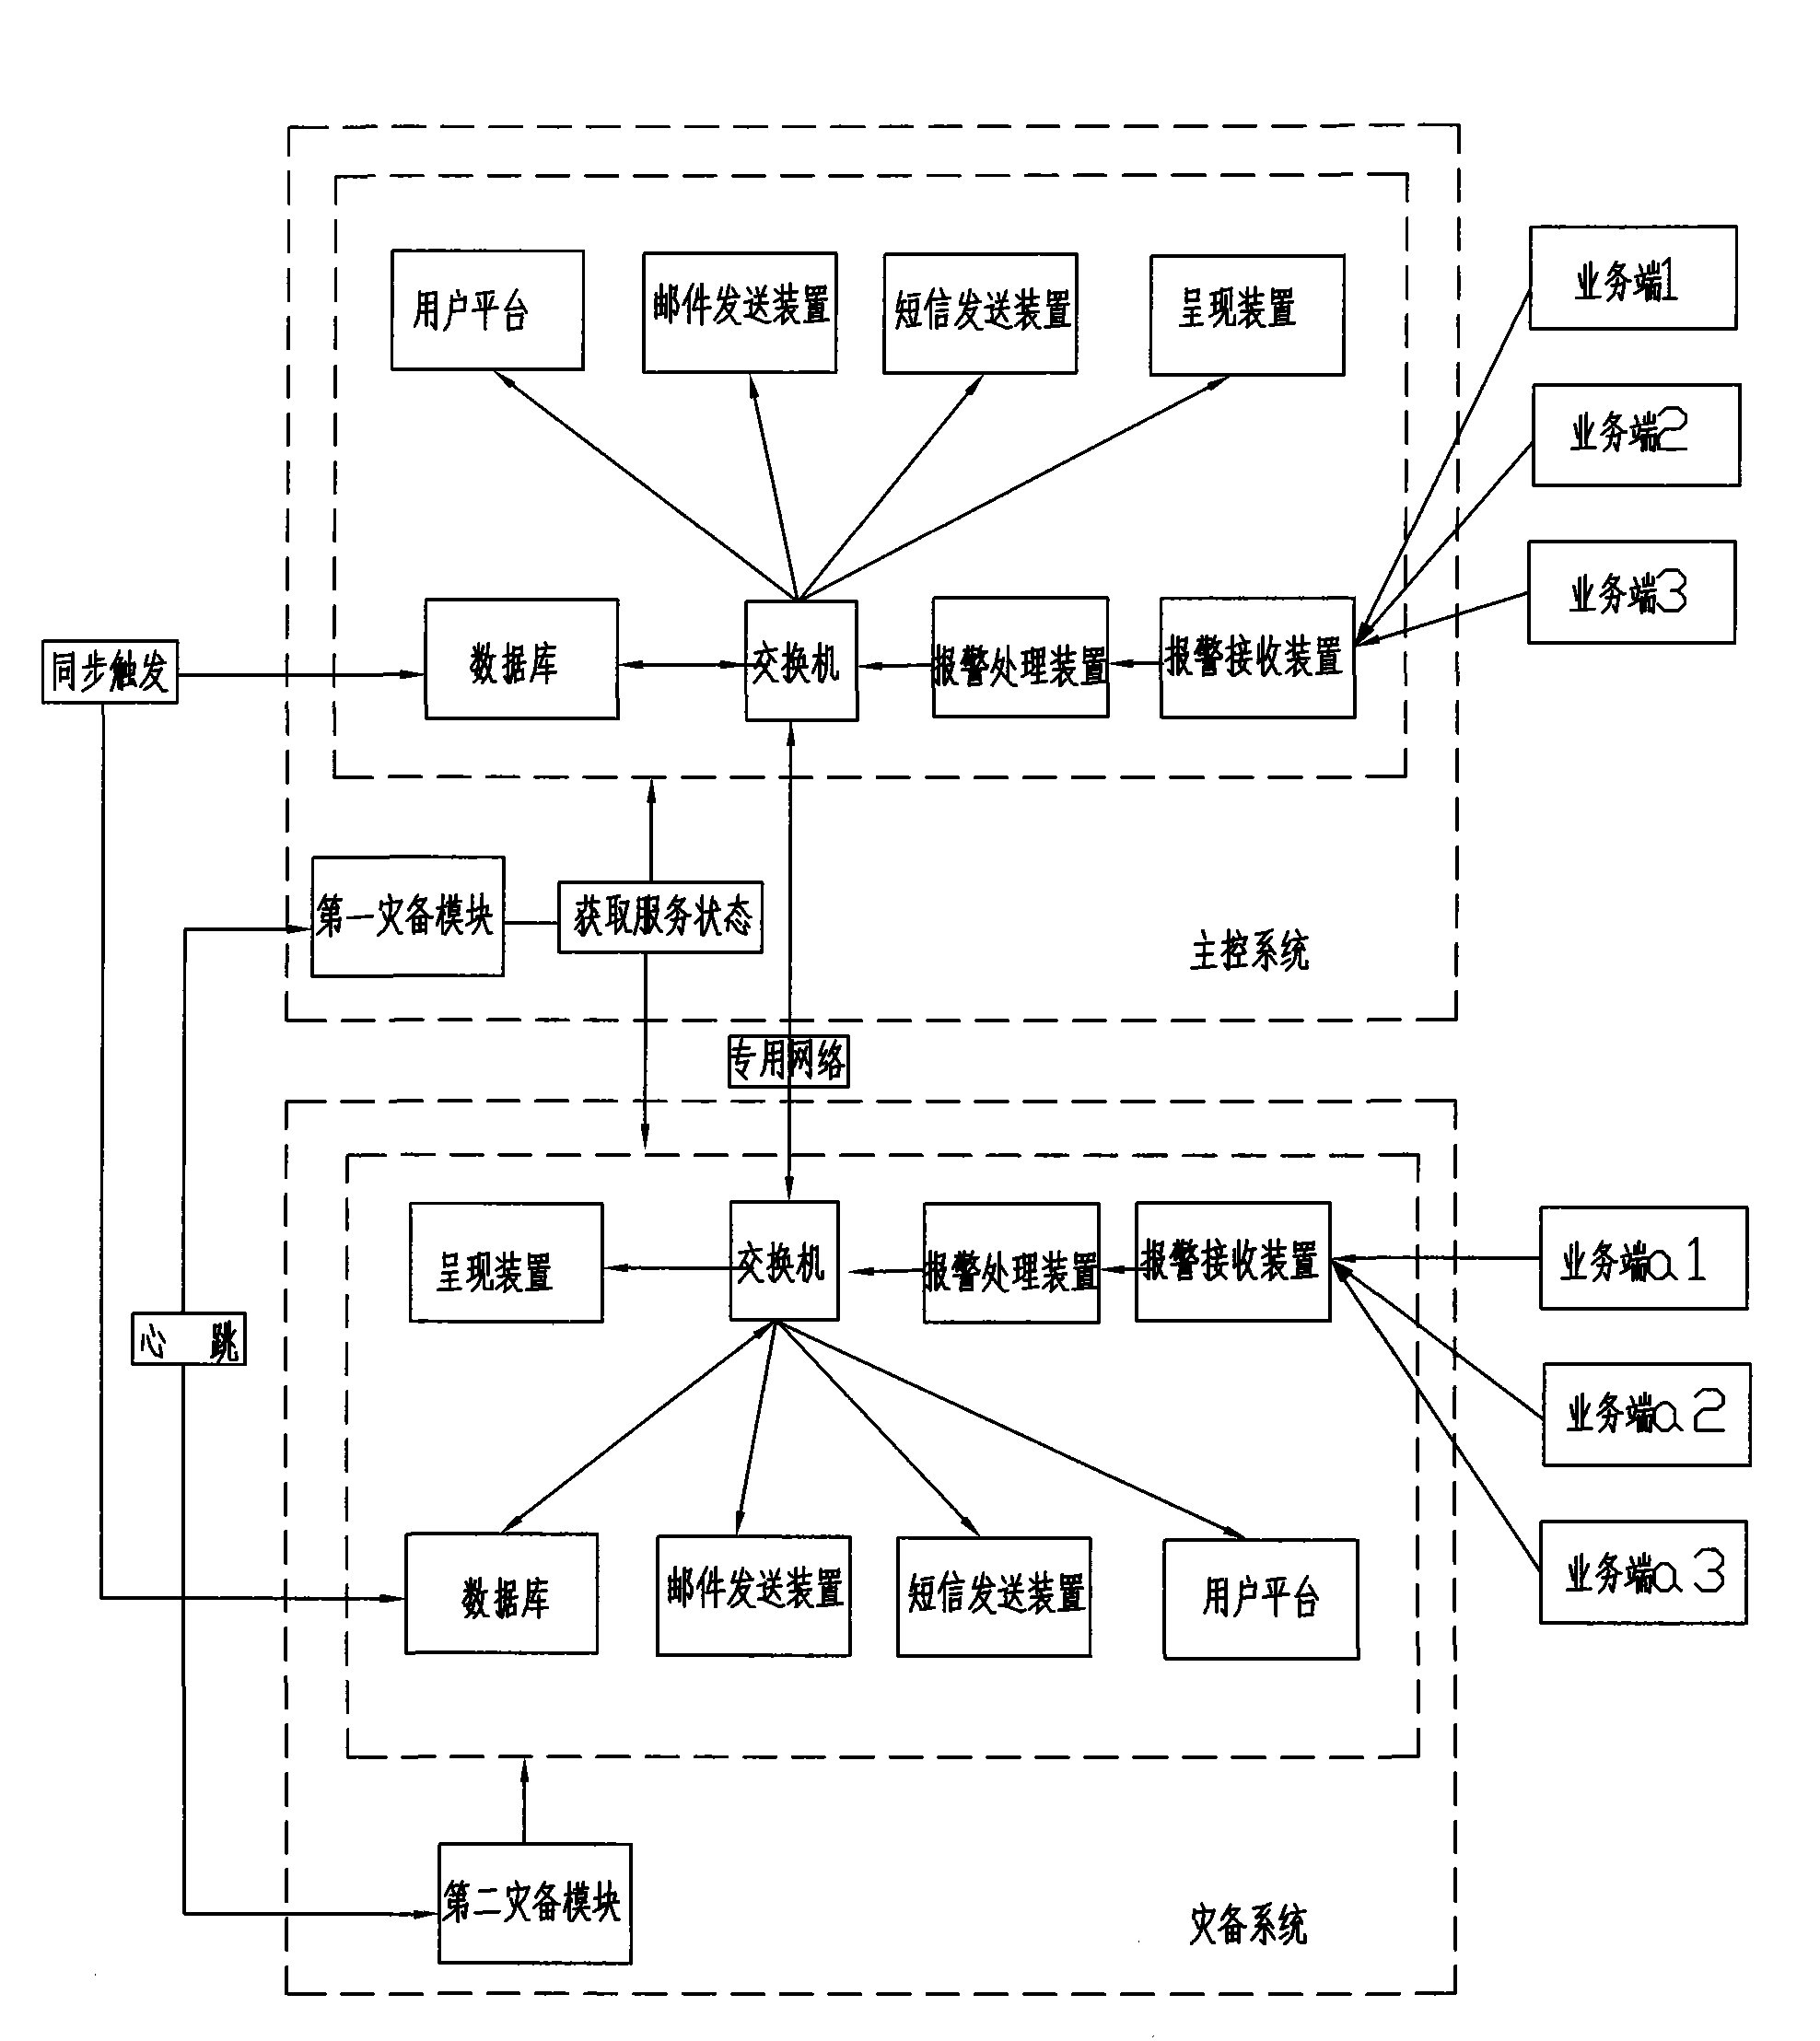 Real-time monitoring warning system and method of unified management multi-business system